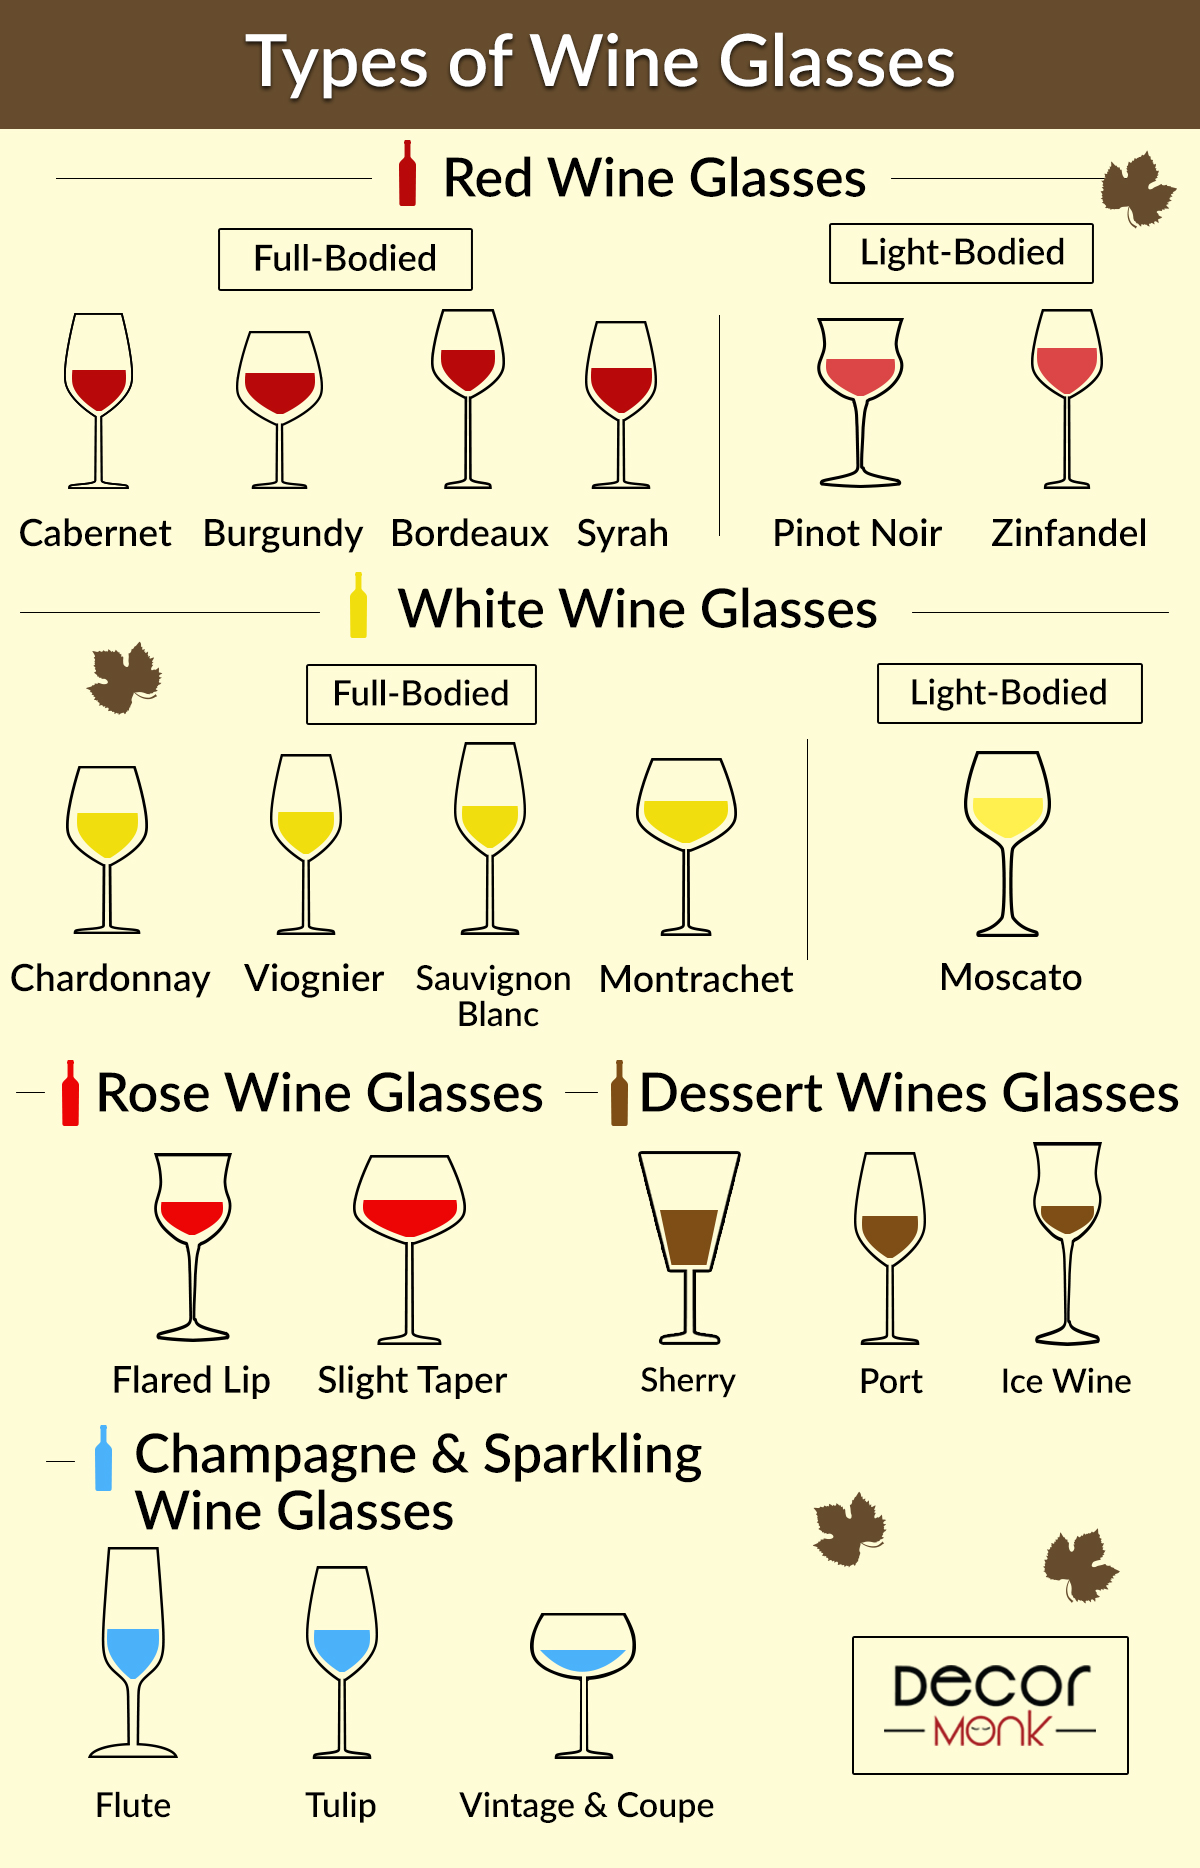 Types of Wine Glasses: A Guide to Different Shapes, Sizes, and More